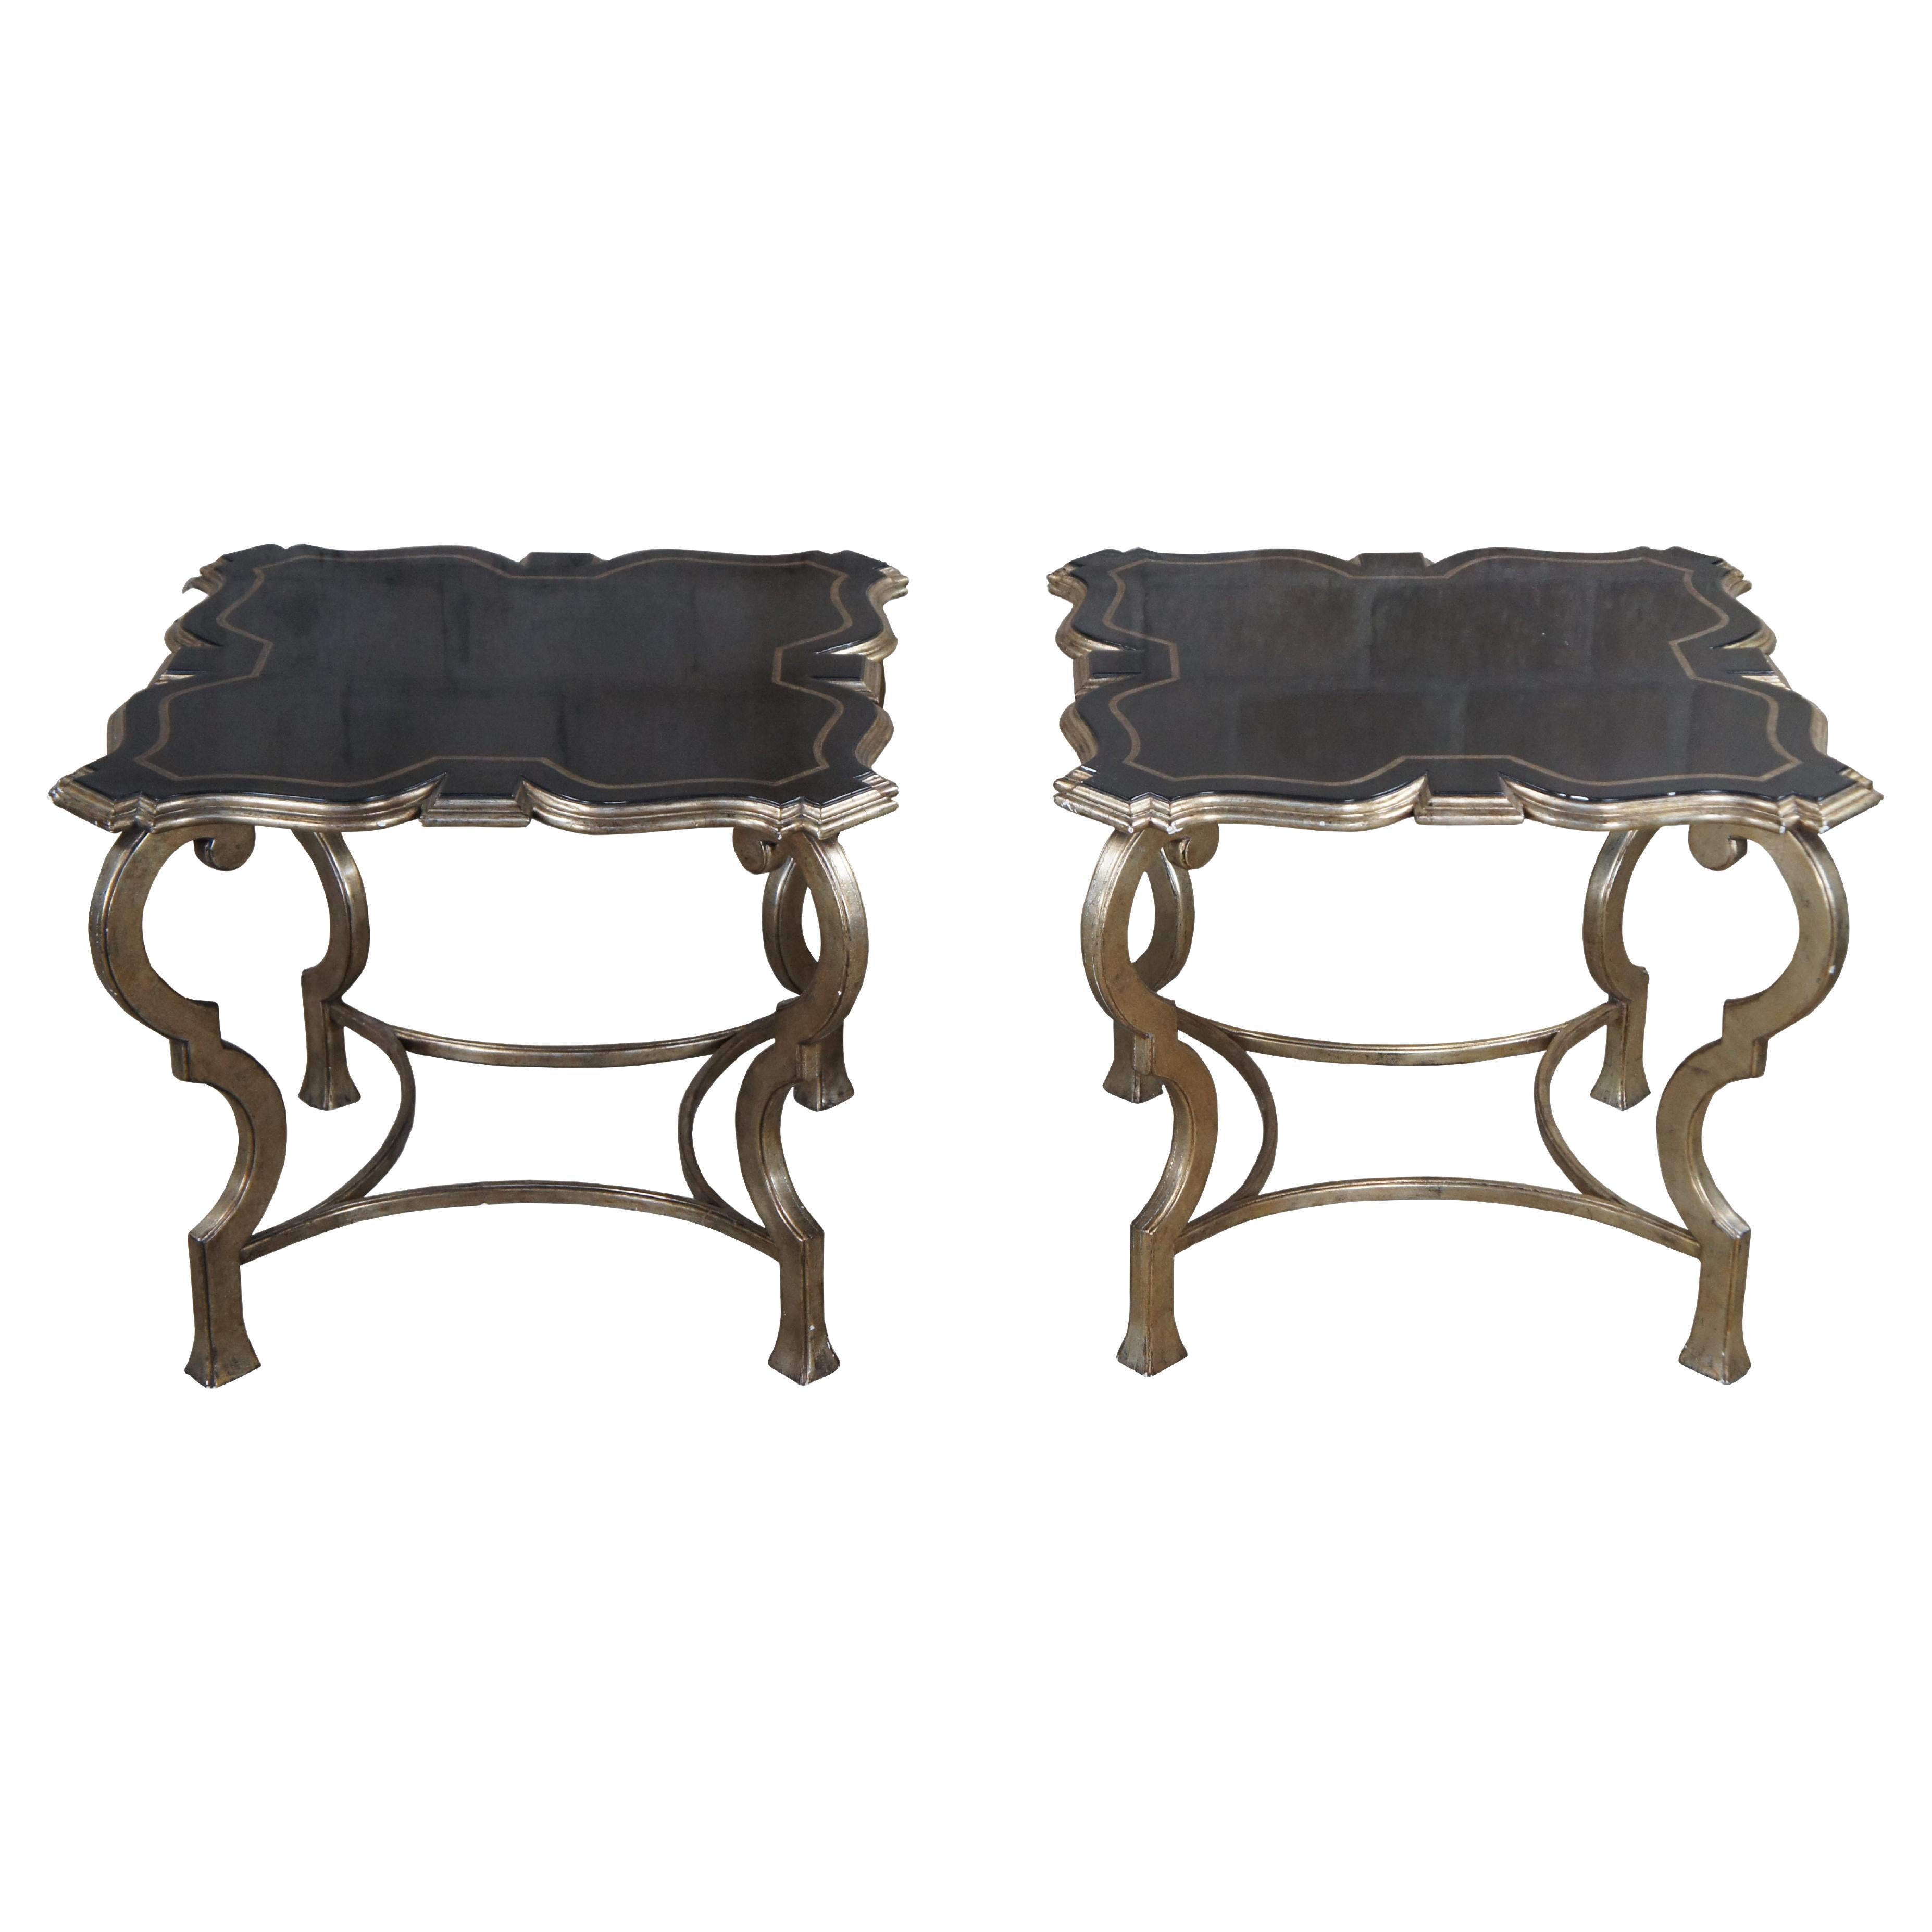 2 Contemporary Champagne & Black Crackled Modern Side End Tables Pair im Angebot